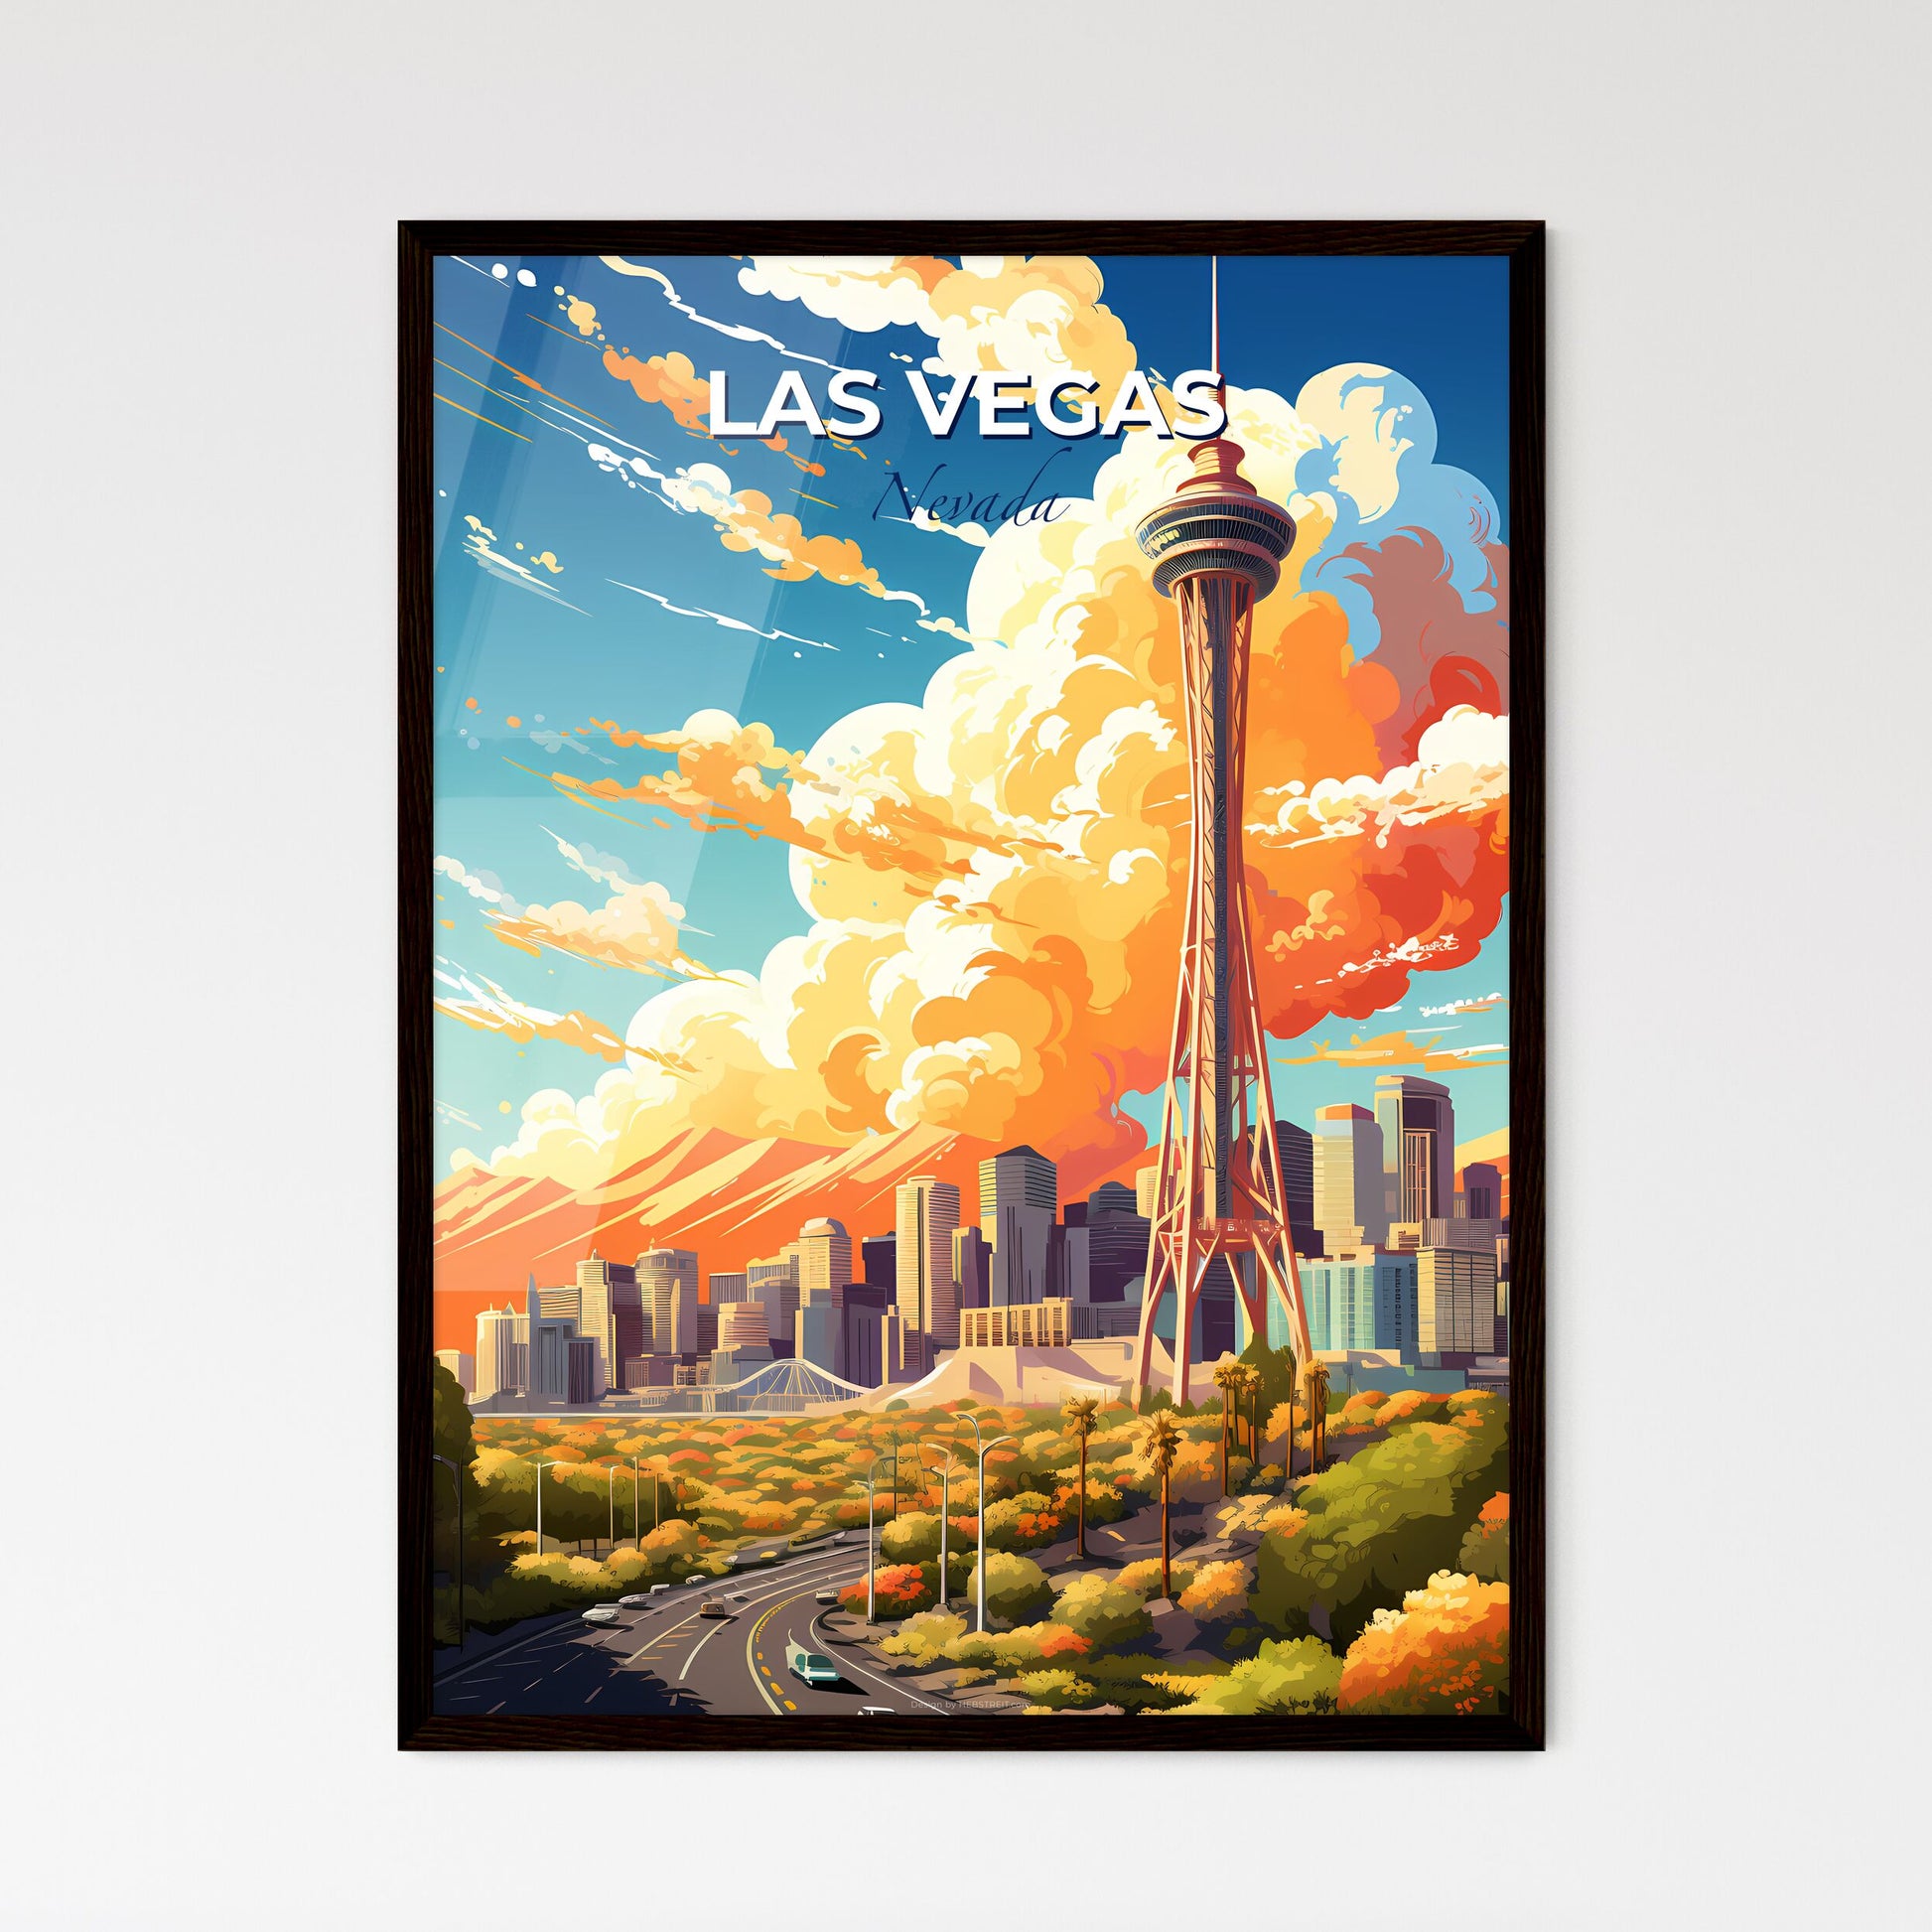 Las Vegas Nevada Skyline - A Tower In A City - Customizable Travel Gift Default Title